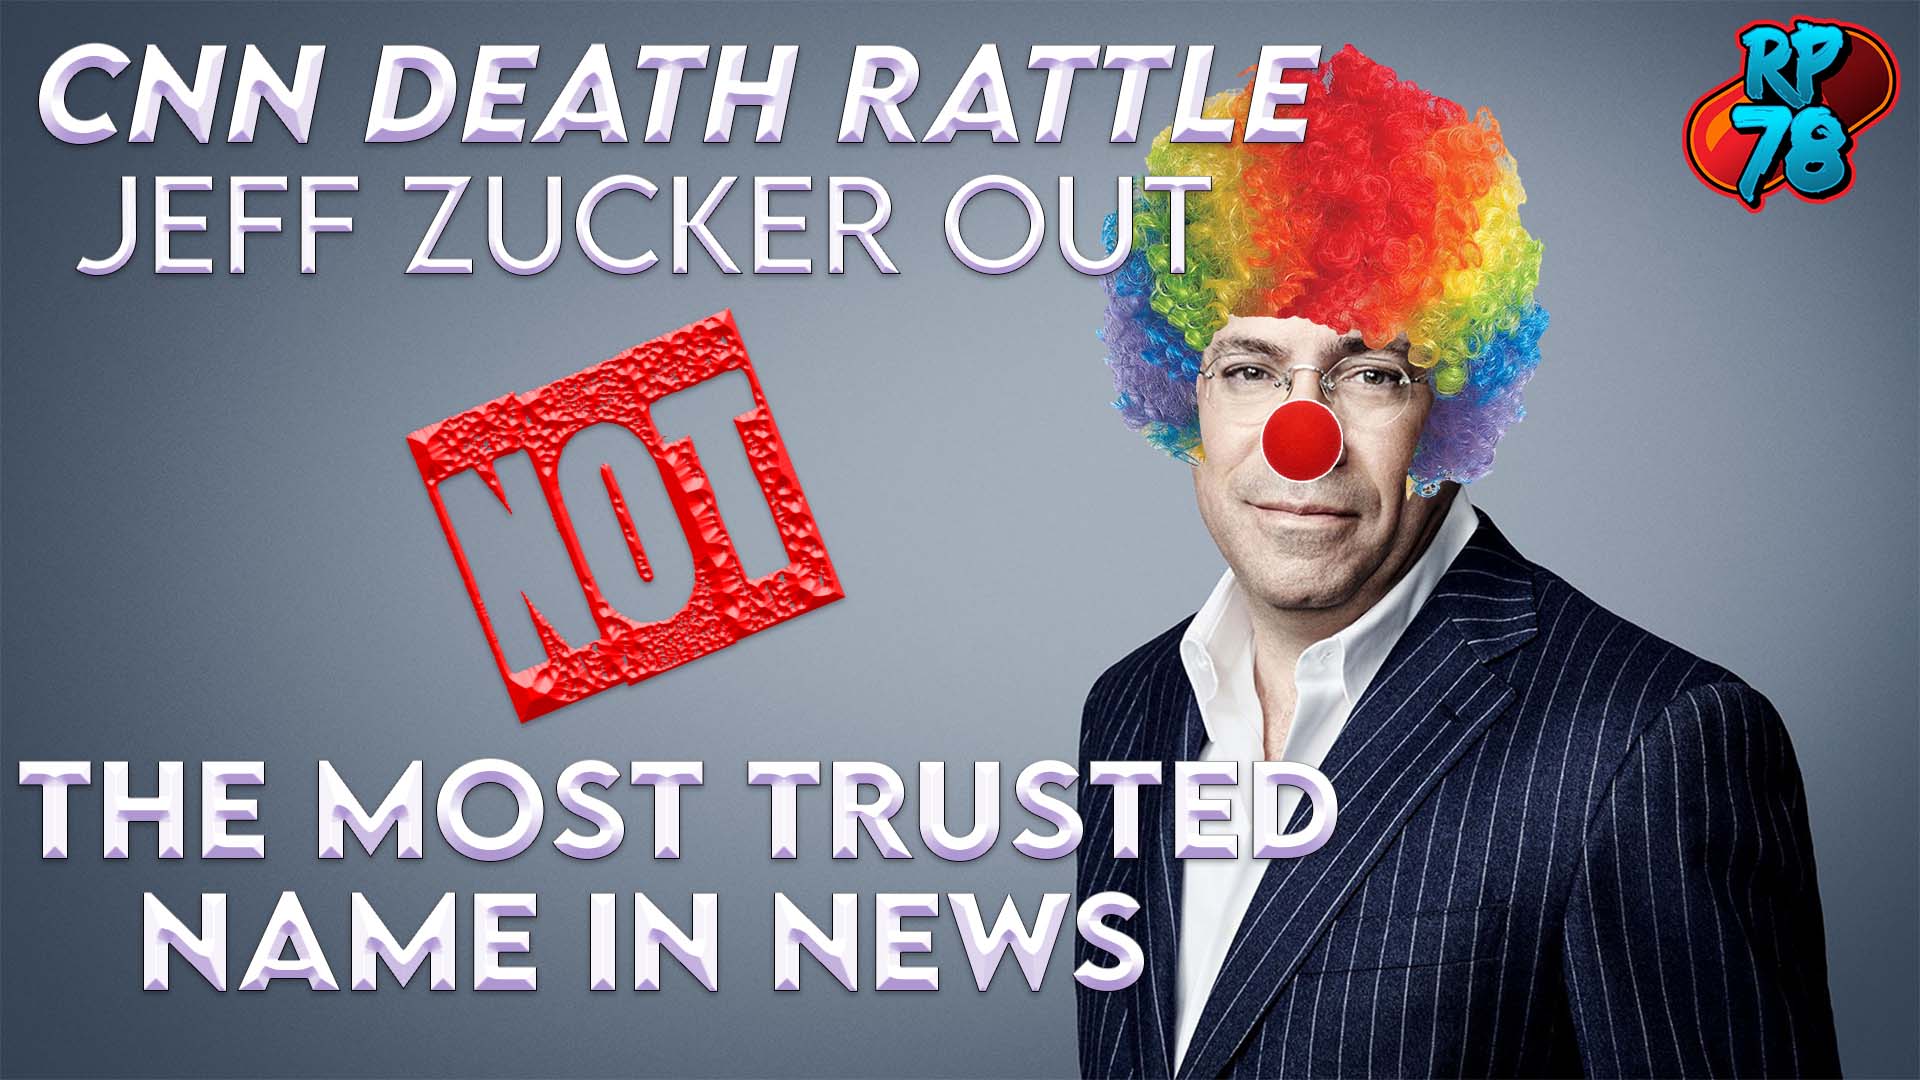 CNN IN SHAMBLES! ZUCKER OUSTED!!! MORE SEXUAL MISCONDUCT!